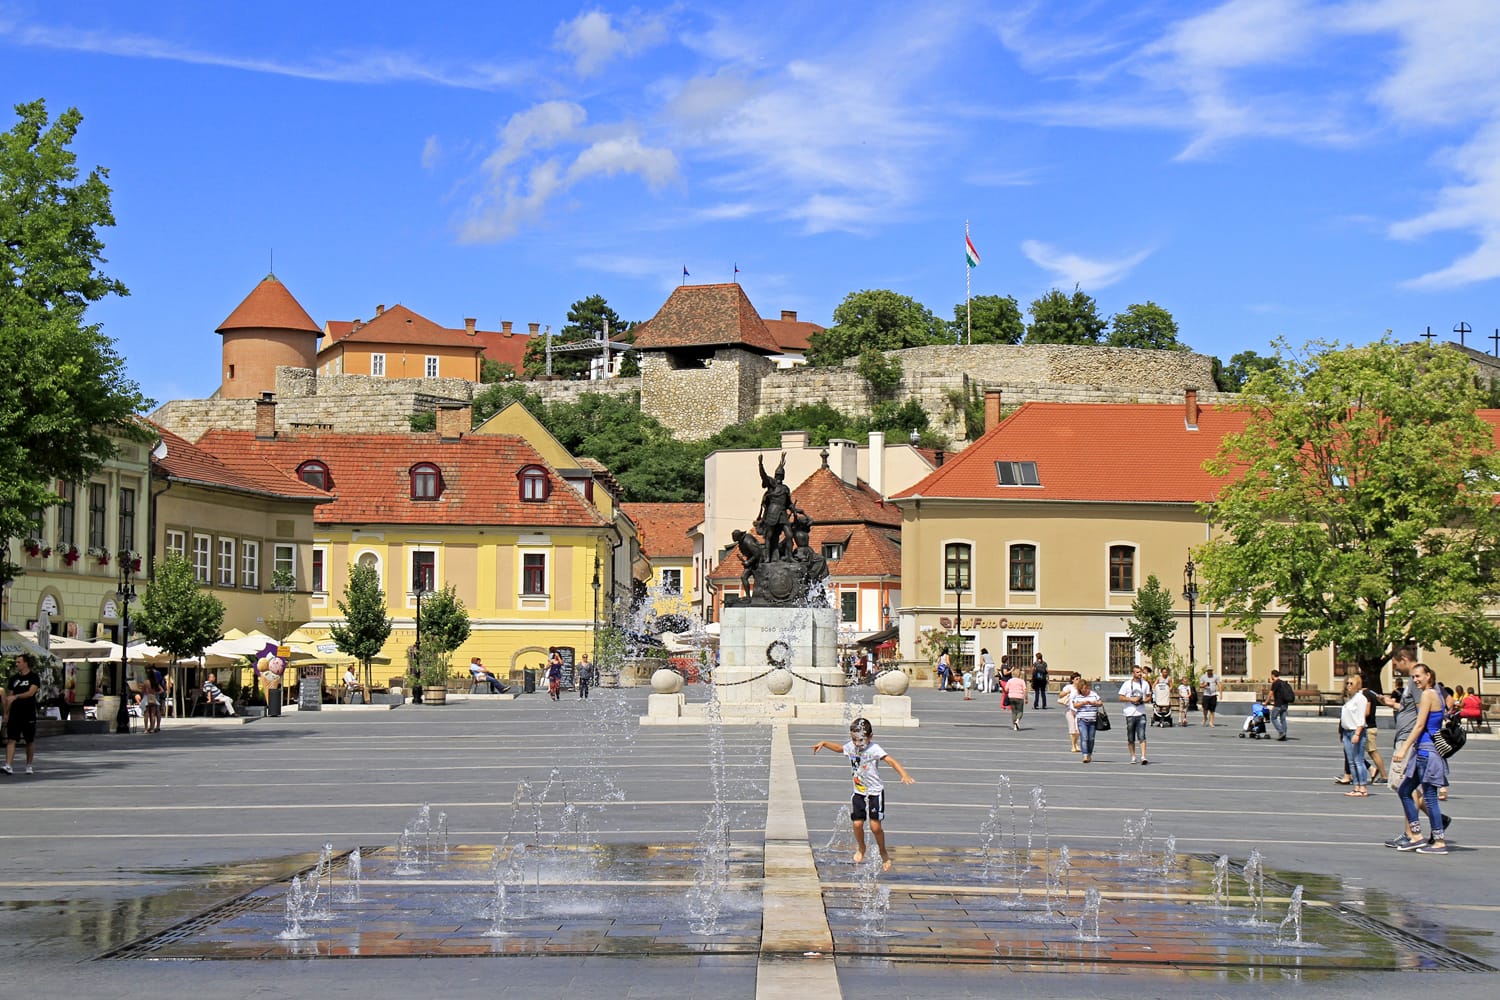 Dobo square is the main square of Eger, Hungary